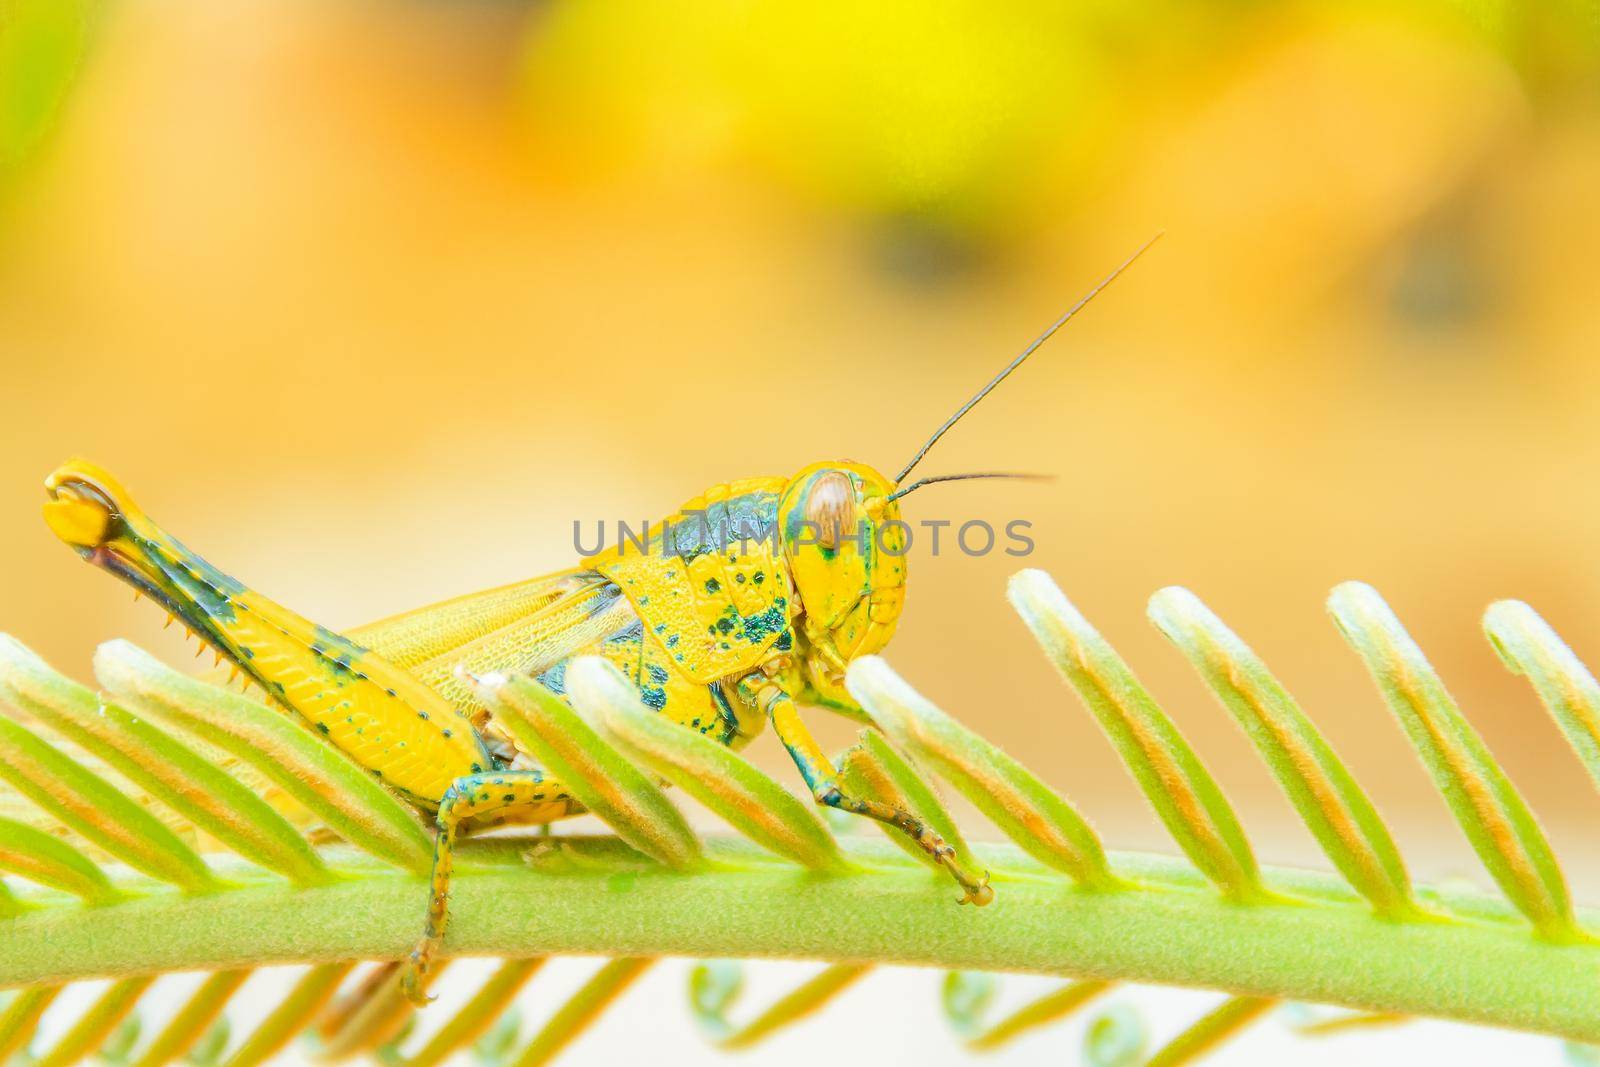 grasshopper yellow on branch of trees with copy space add text select focus with shallow depth of field.